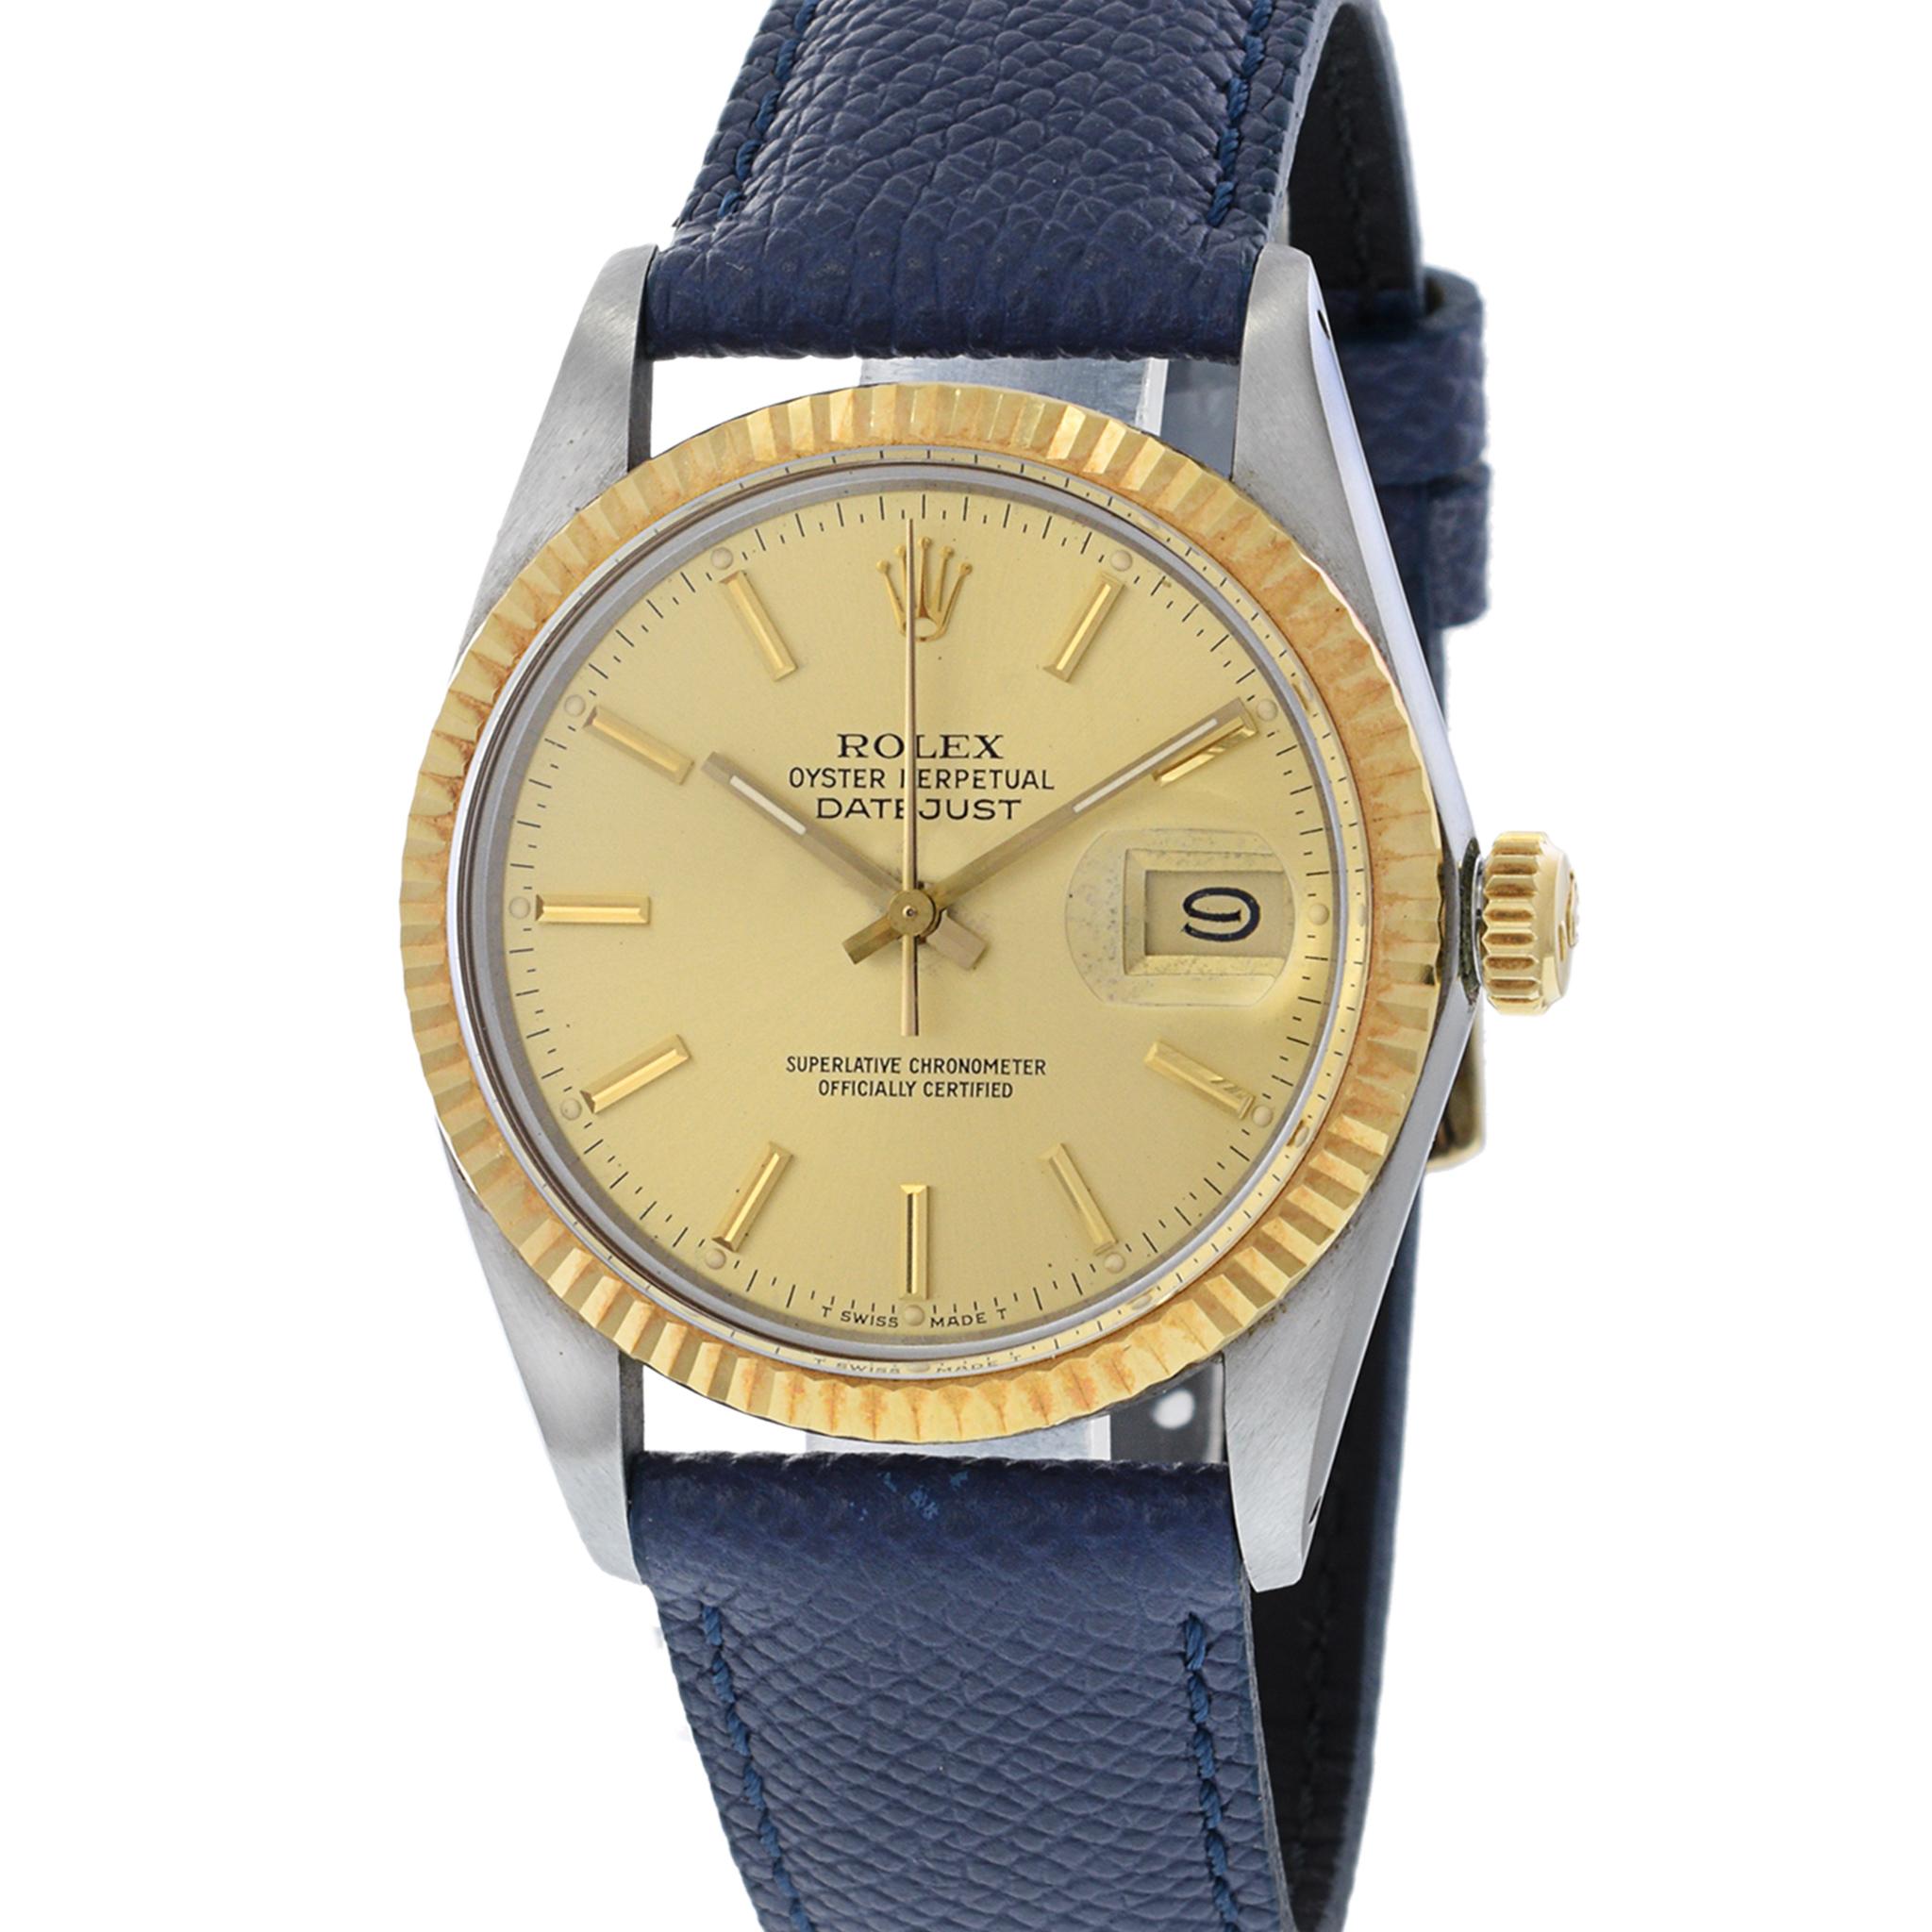 Rolex Datejust 36 Two Tone Reference 16013 In Good Condition For Sale In New York, NY